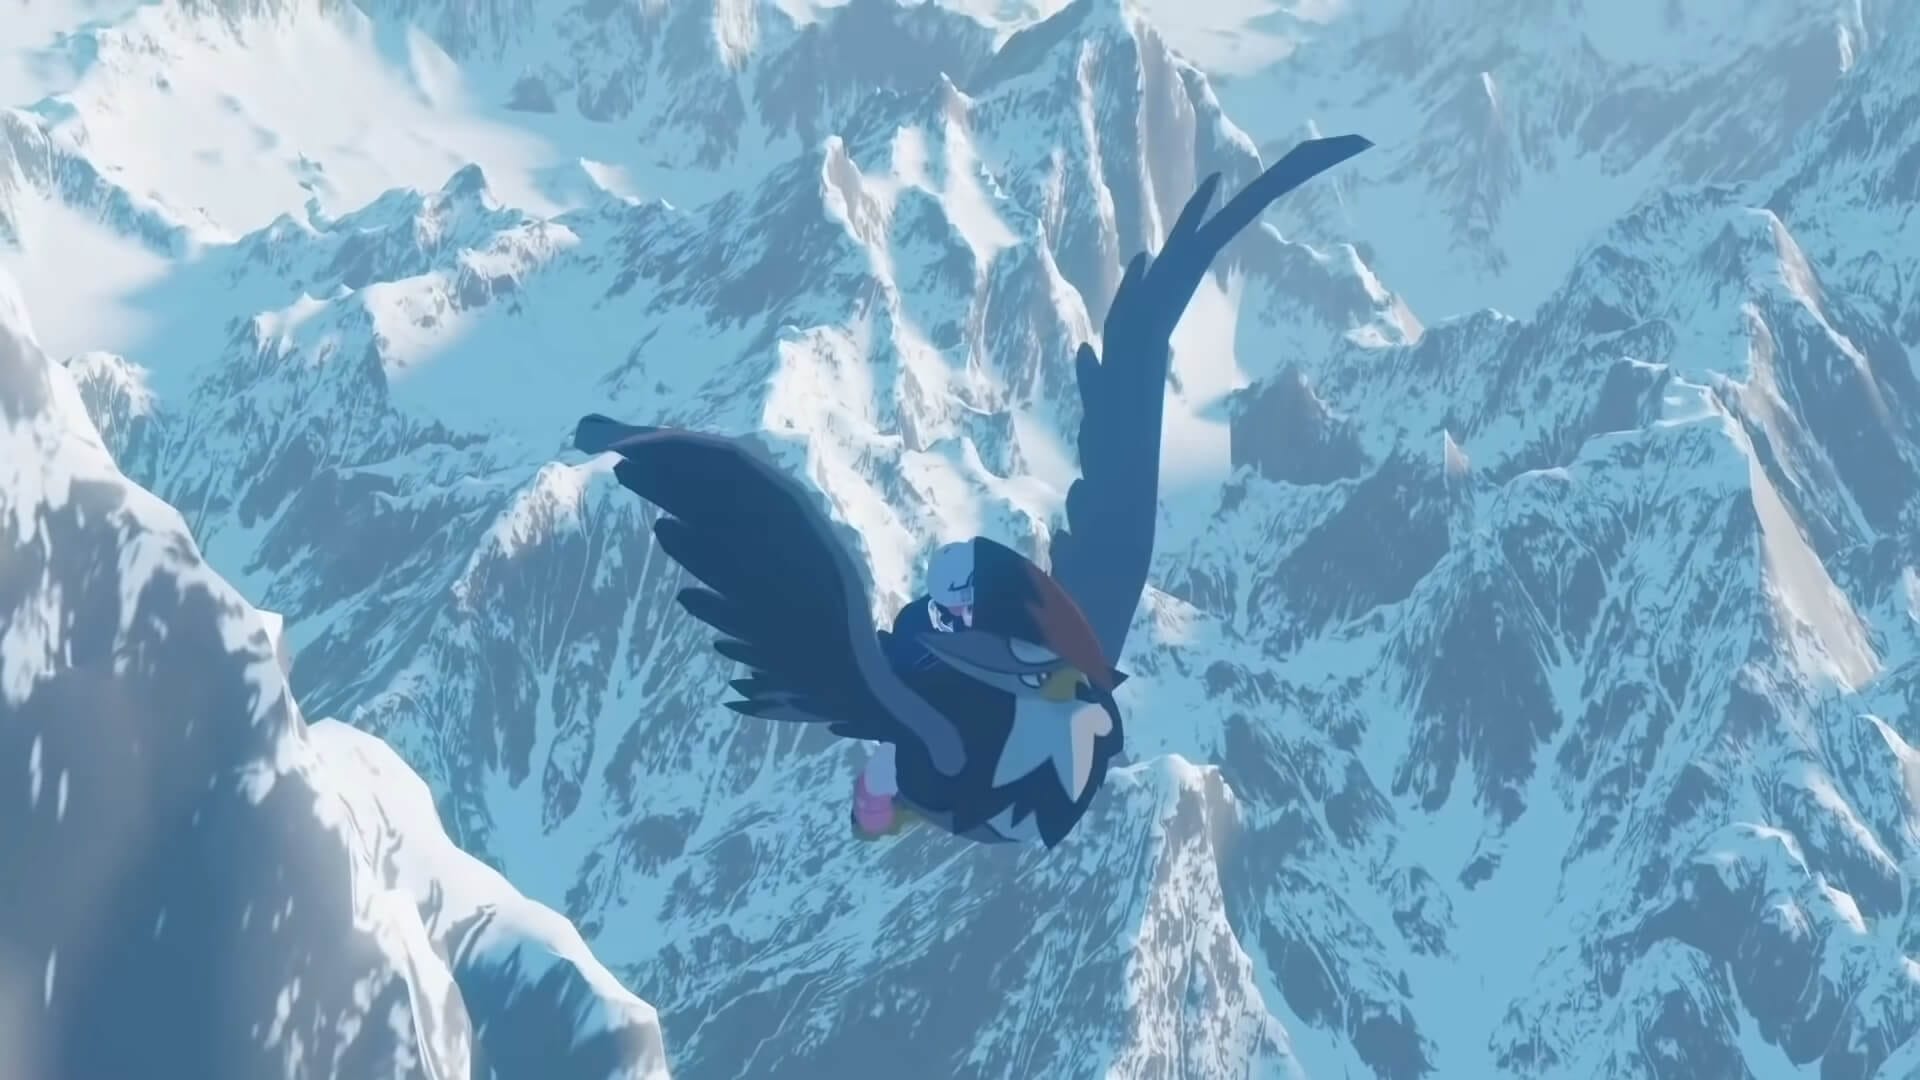 Dawn riding a Staraptor in a mockup trailer for a Pokemon game.